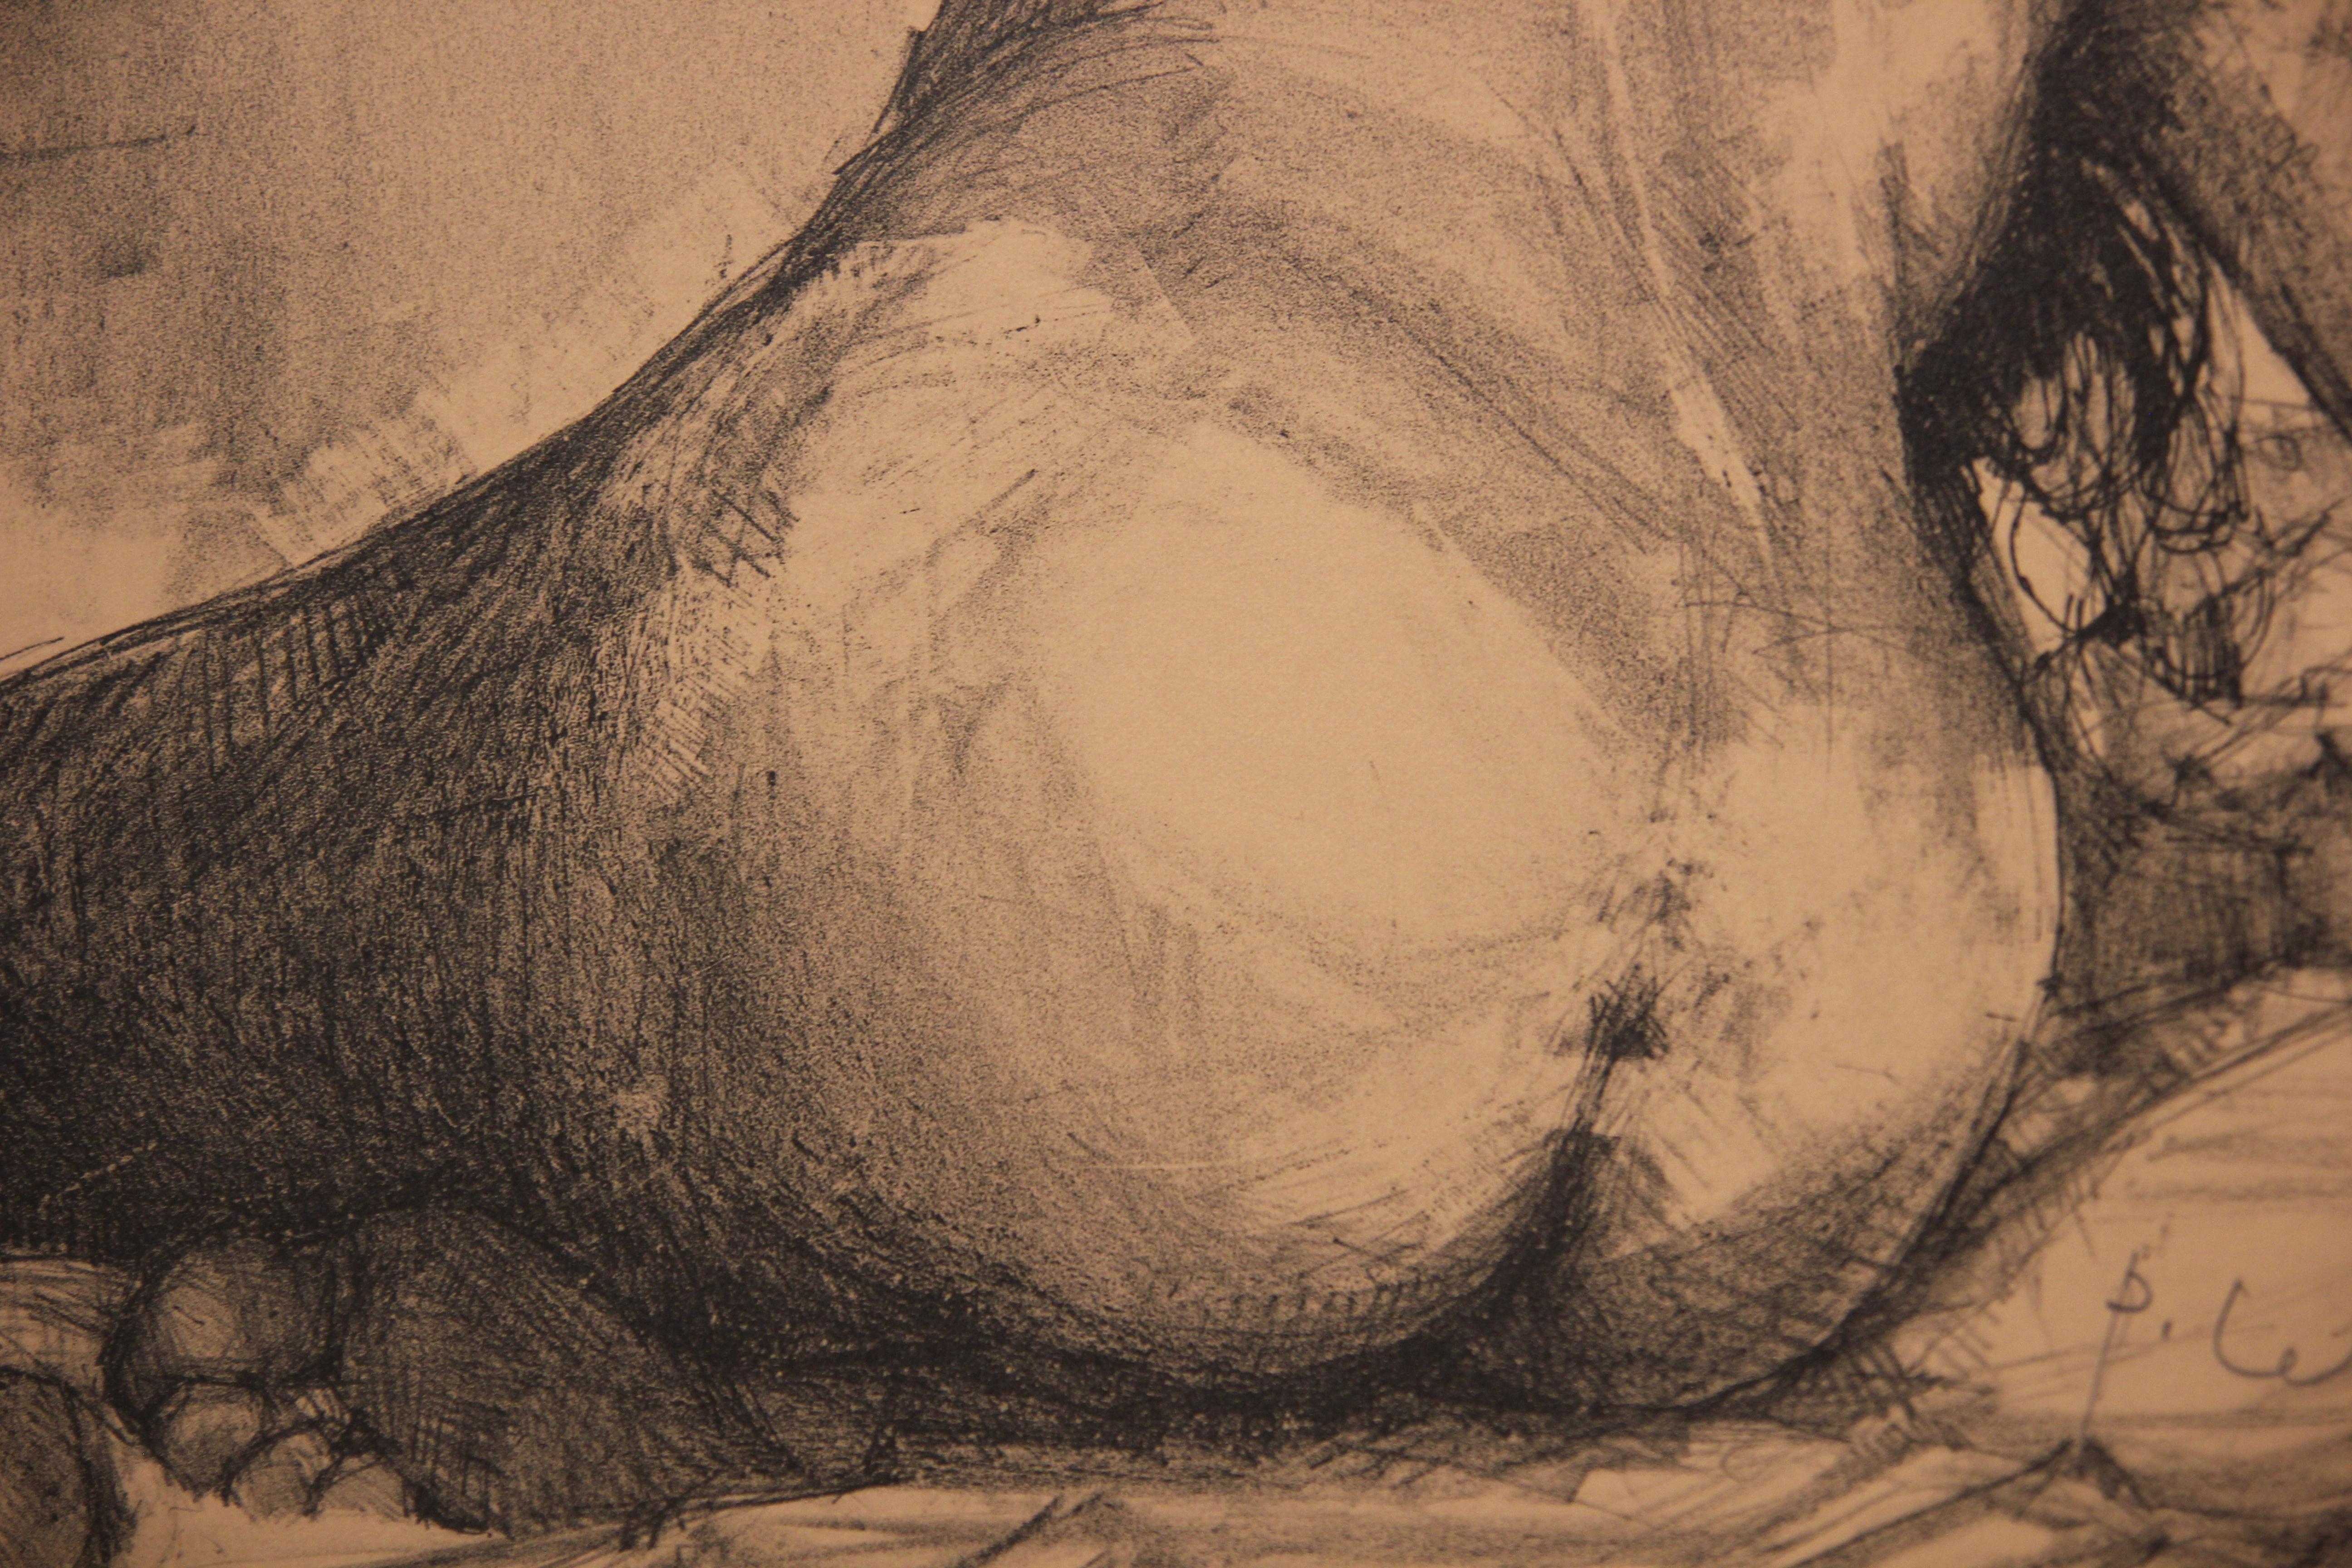 Figurative Nude Study of a Woman from Behind - Art by Pierre Letellier